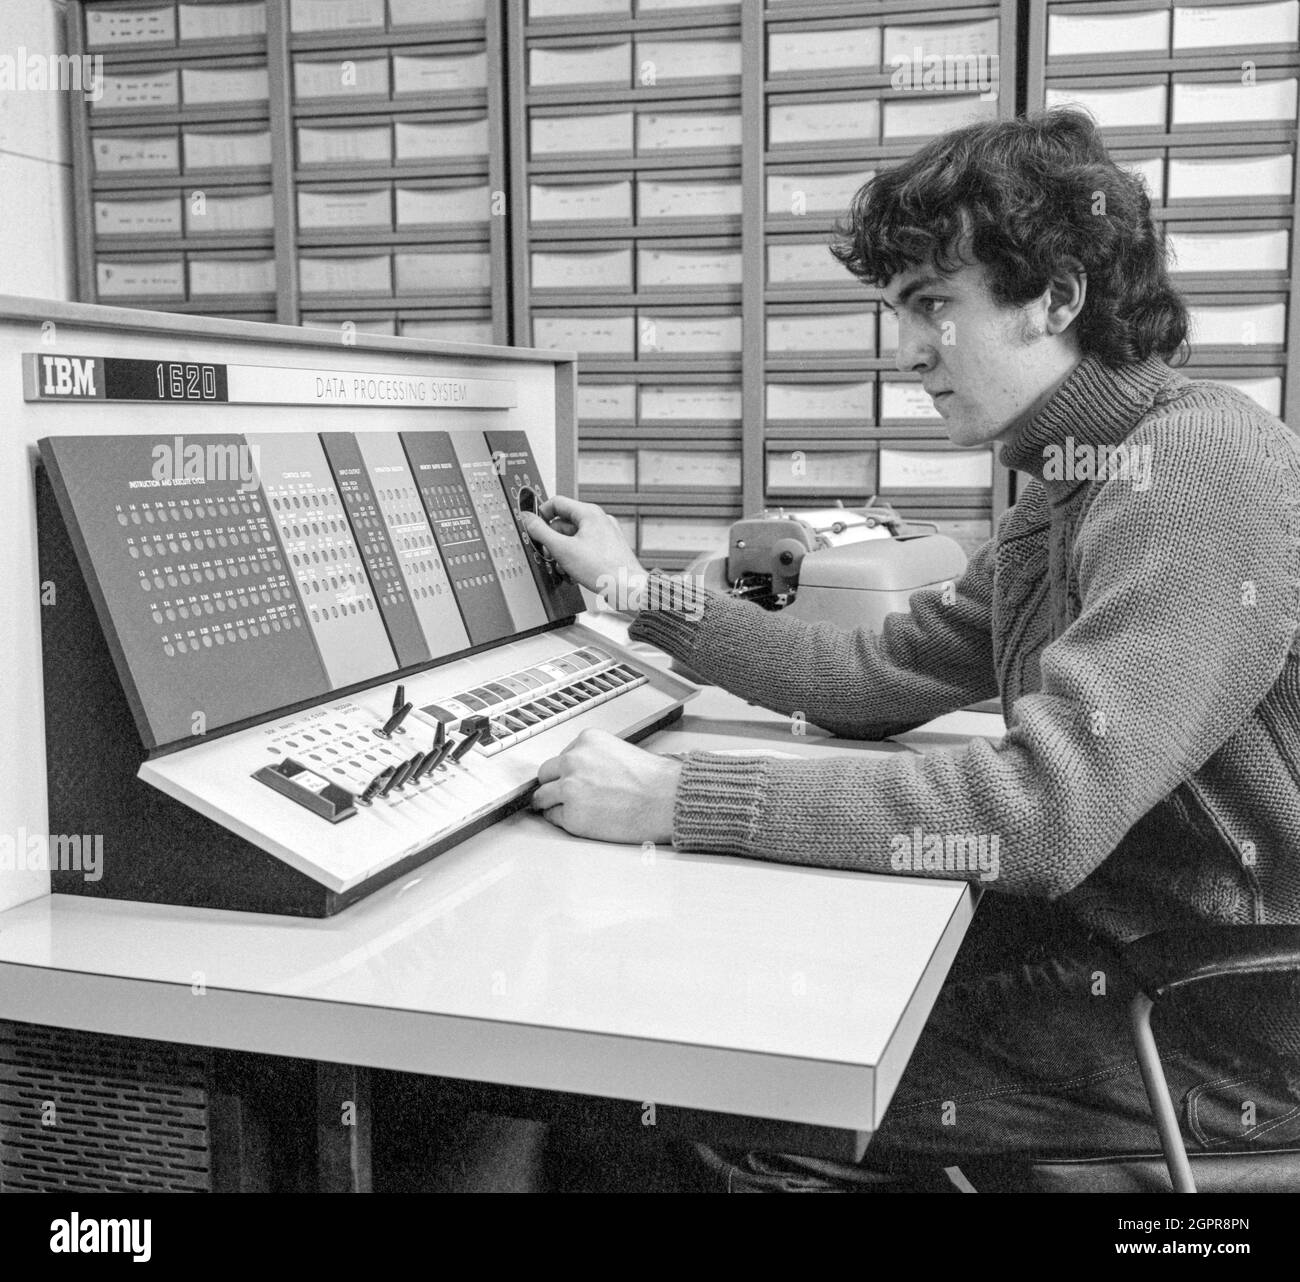 A student at Regent Street Polytechnic (now the University of Westminster) London UK using an IBM 1620 Data Processing System in 1970. Stock Photo